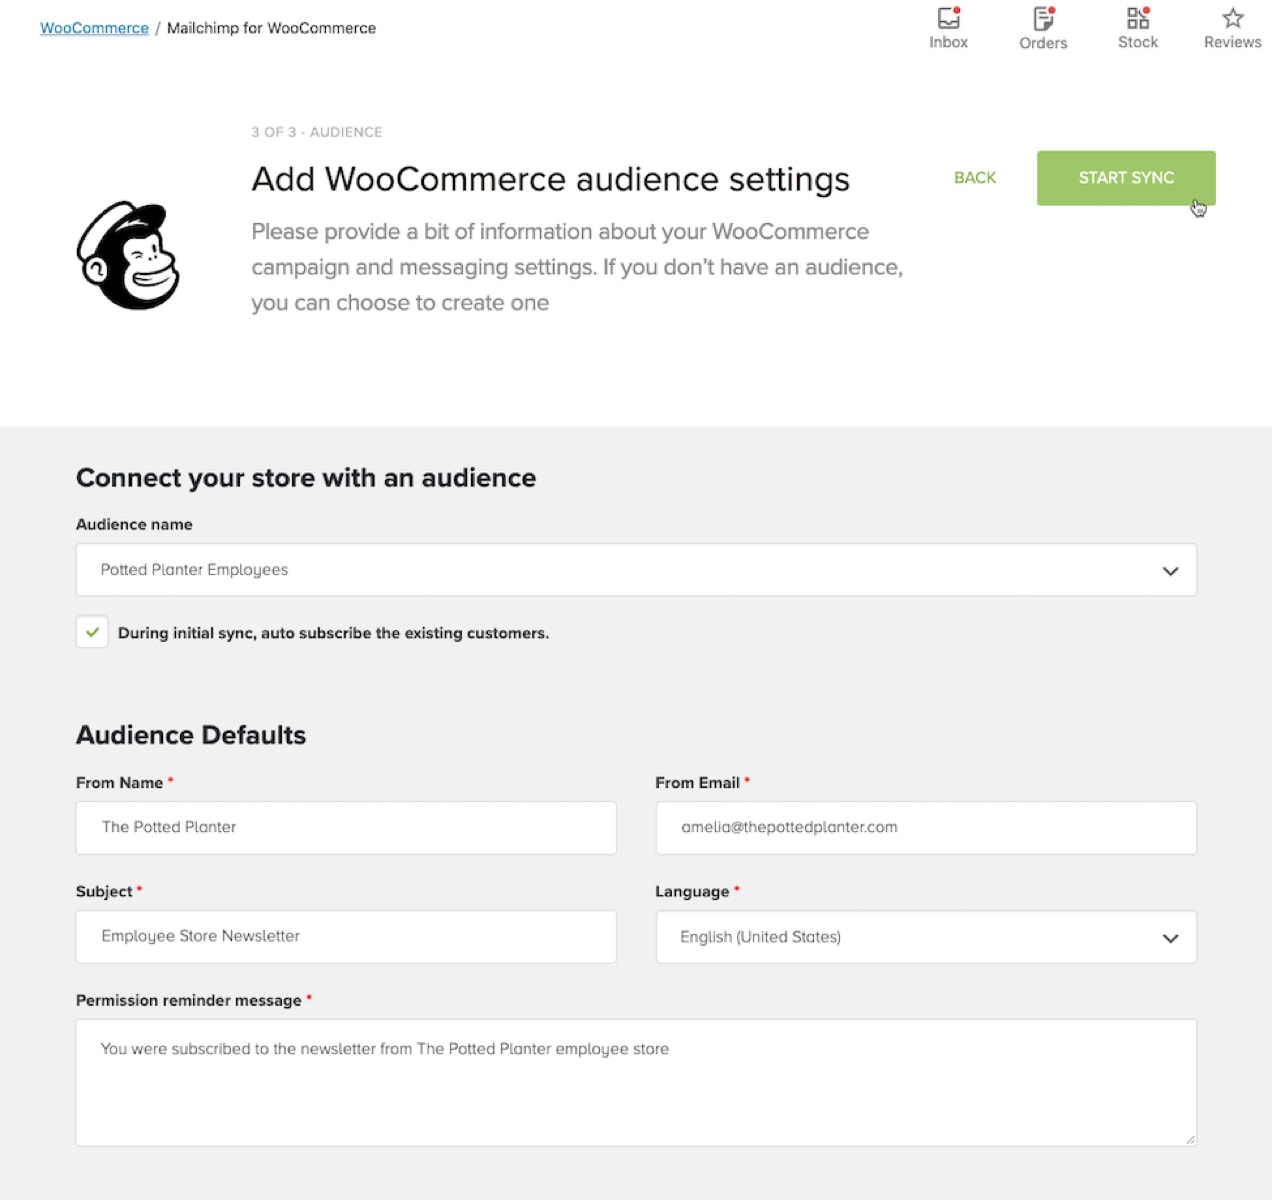 adding a WooCommerce audience to Mailchimp